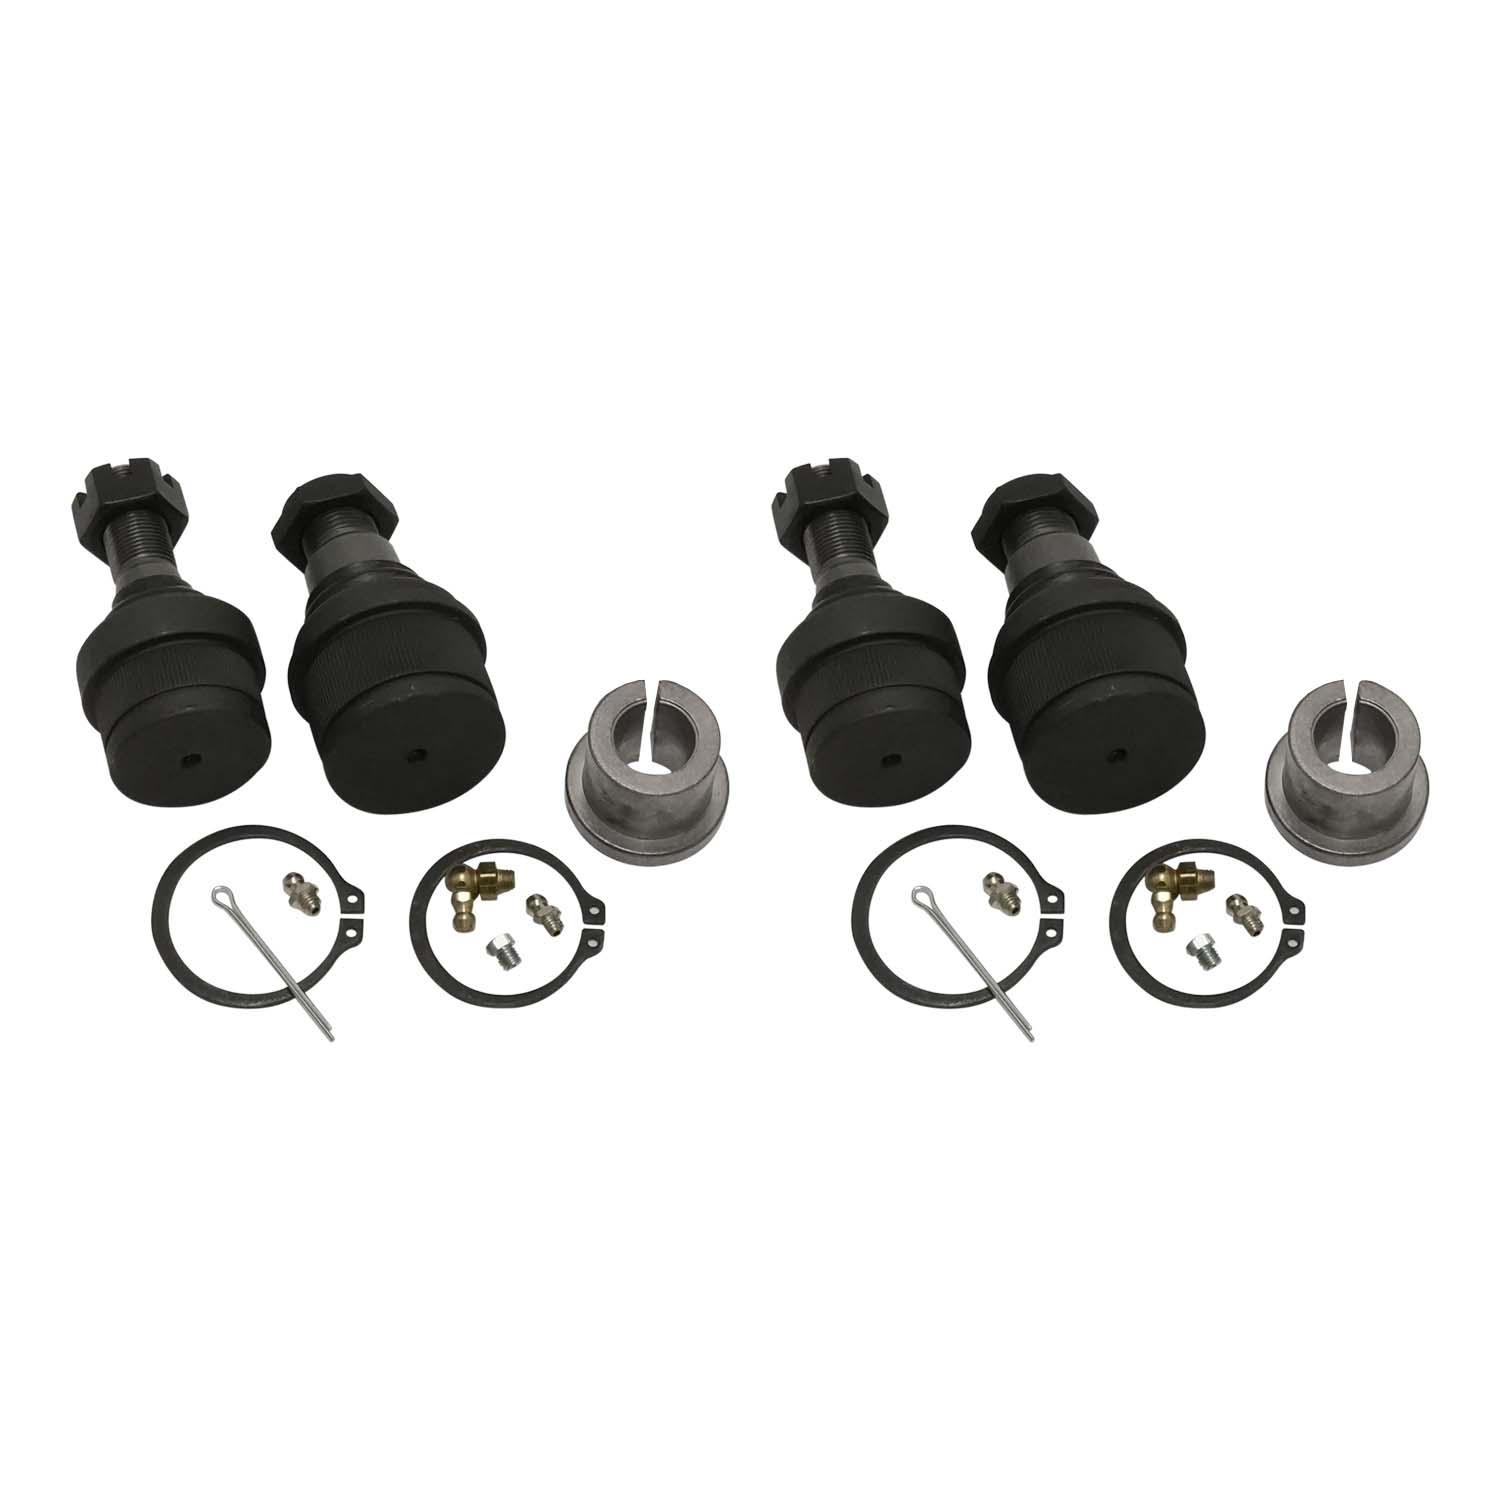 Ball Joint Kit For Dana 50/60 Front Differential, Both Sides W/Bushing